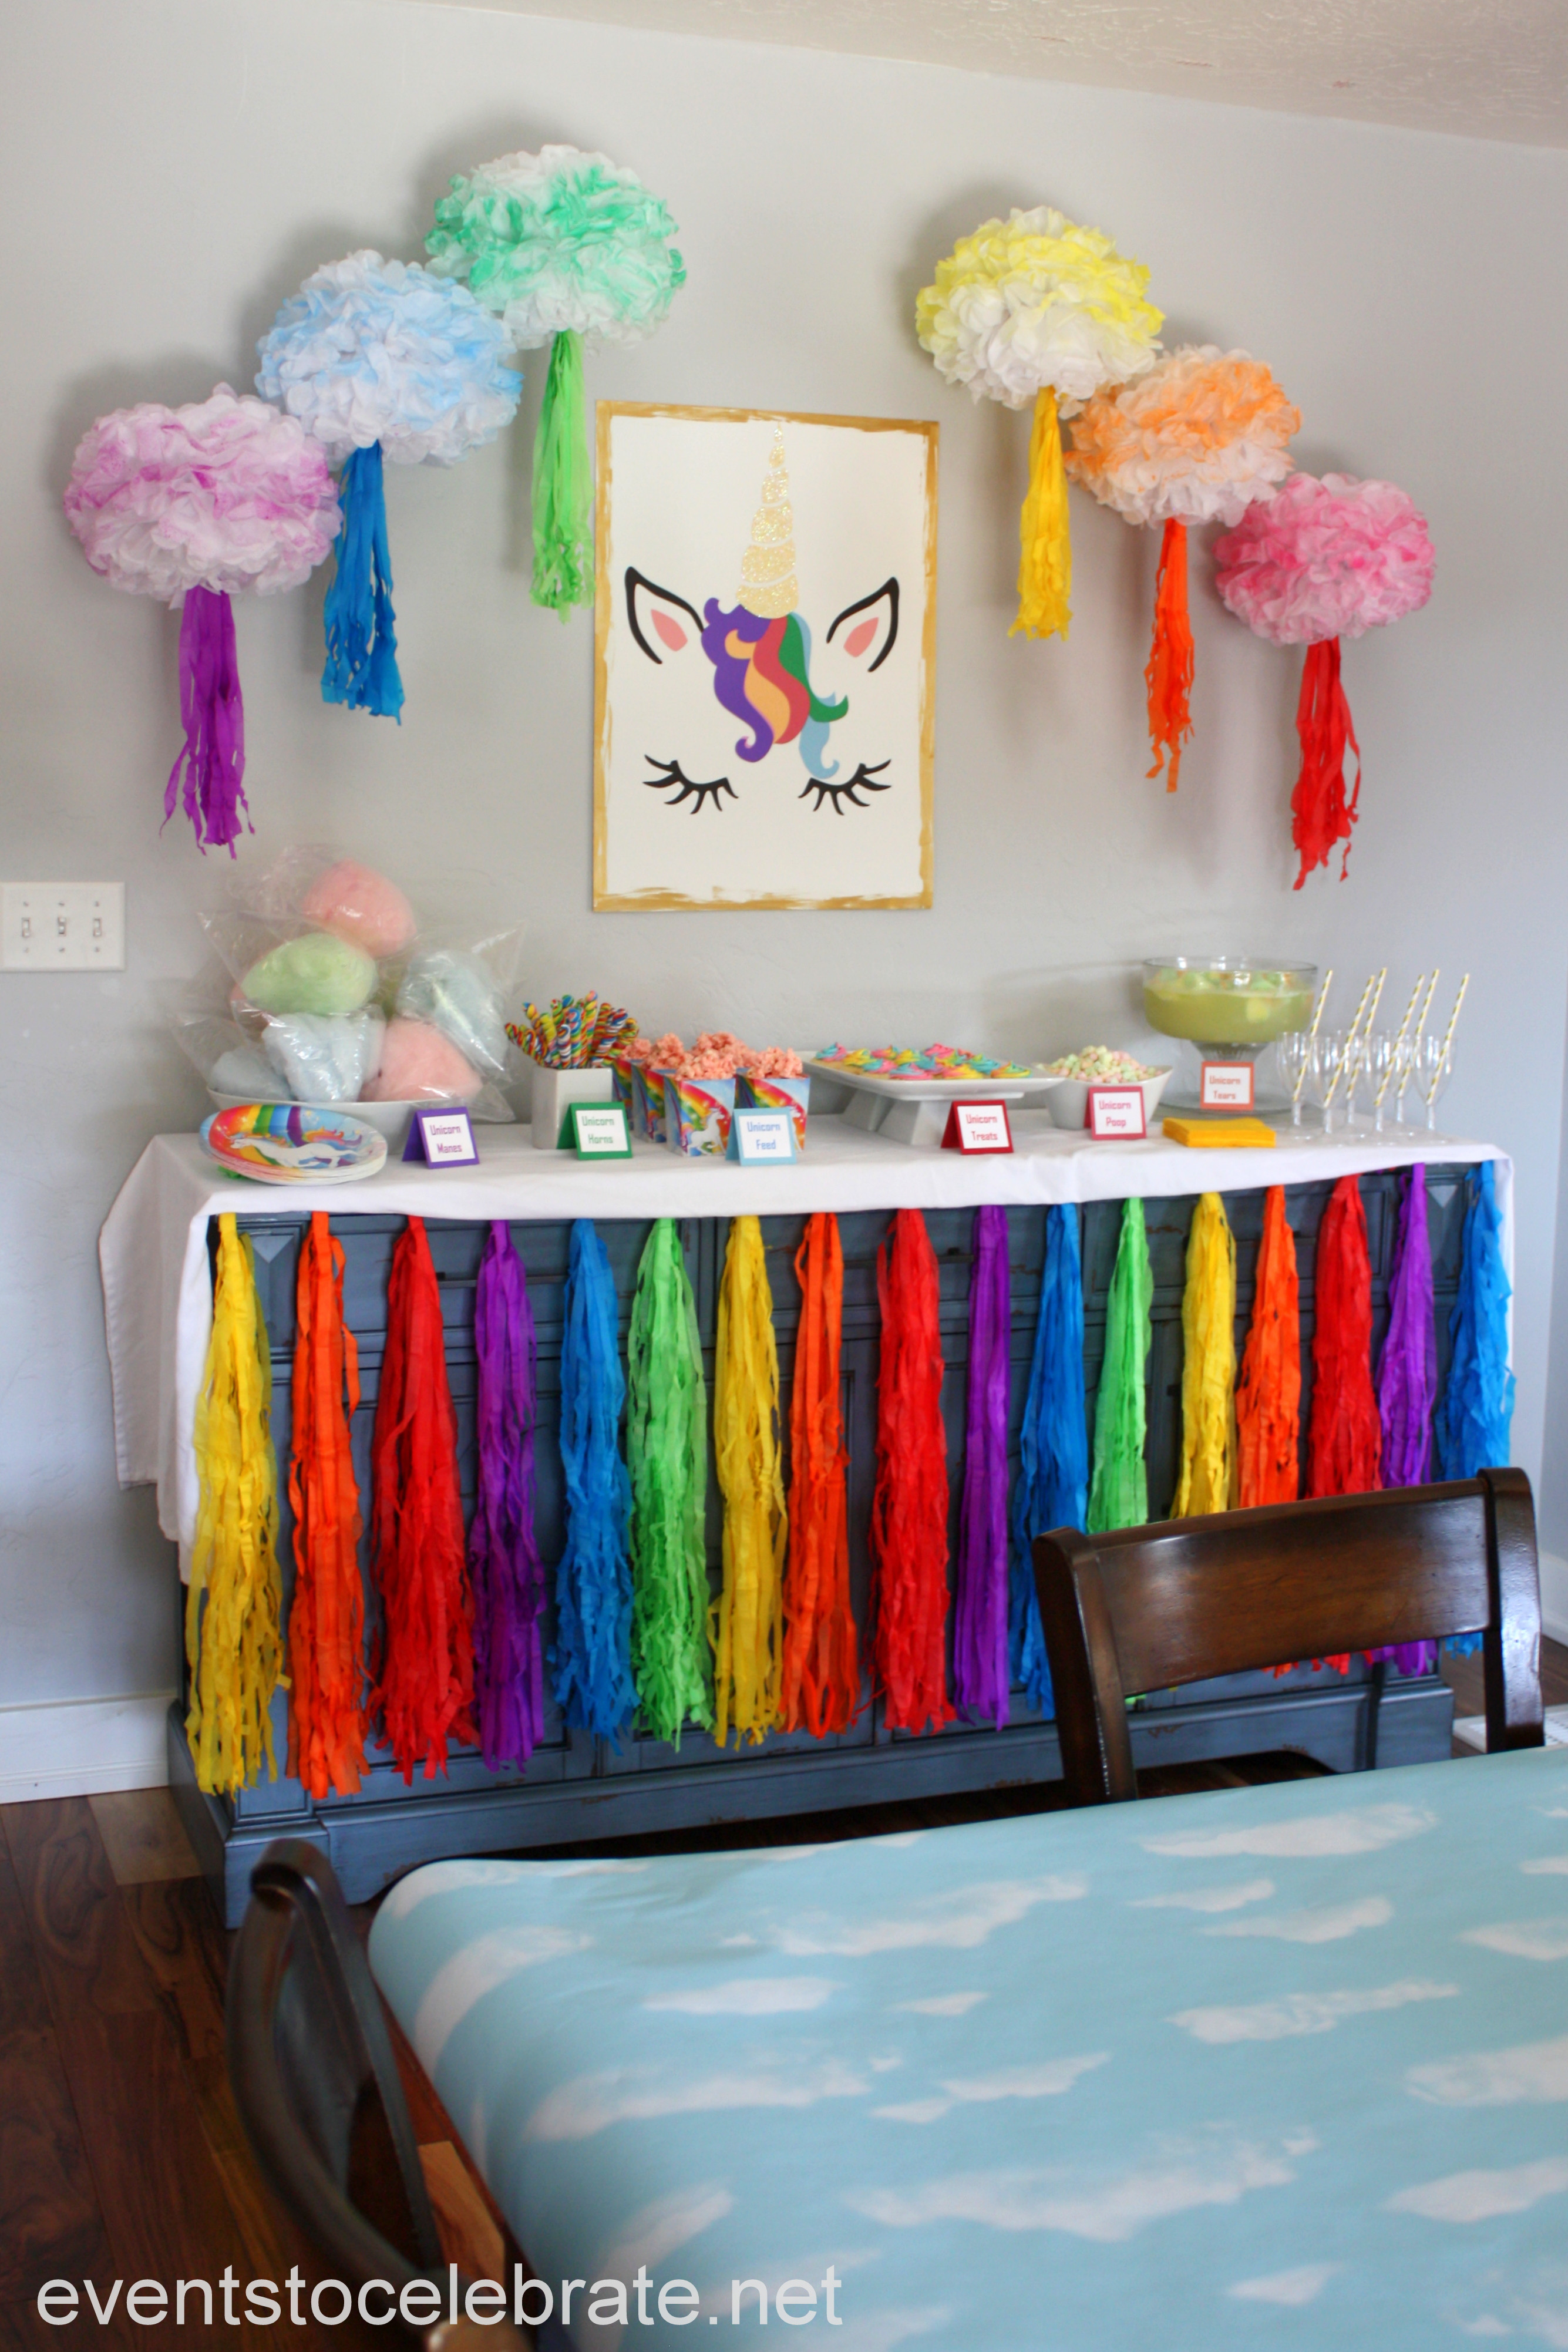 Unicorn Party Decorating Ideas
 Unicorn Party Decorations and Food